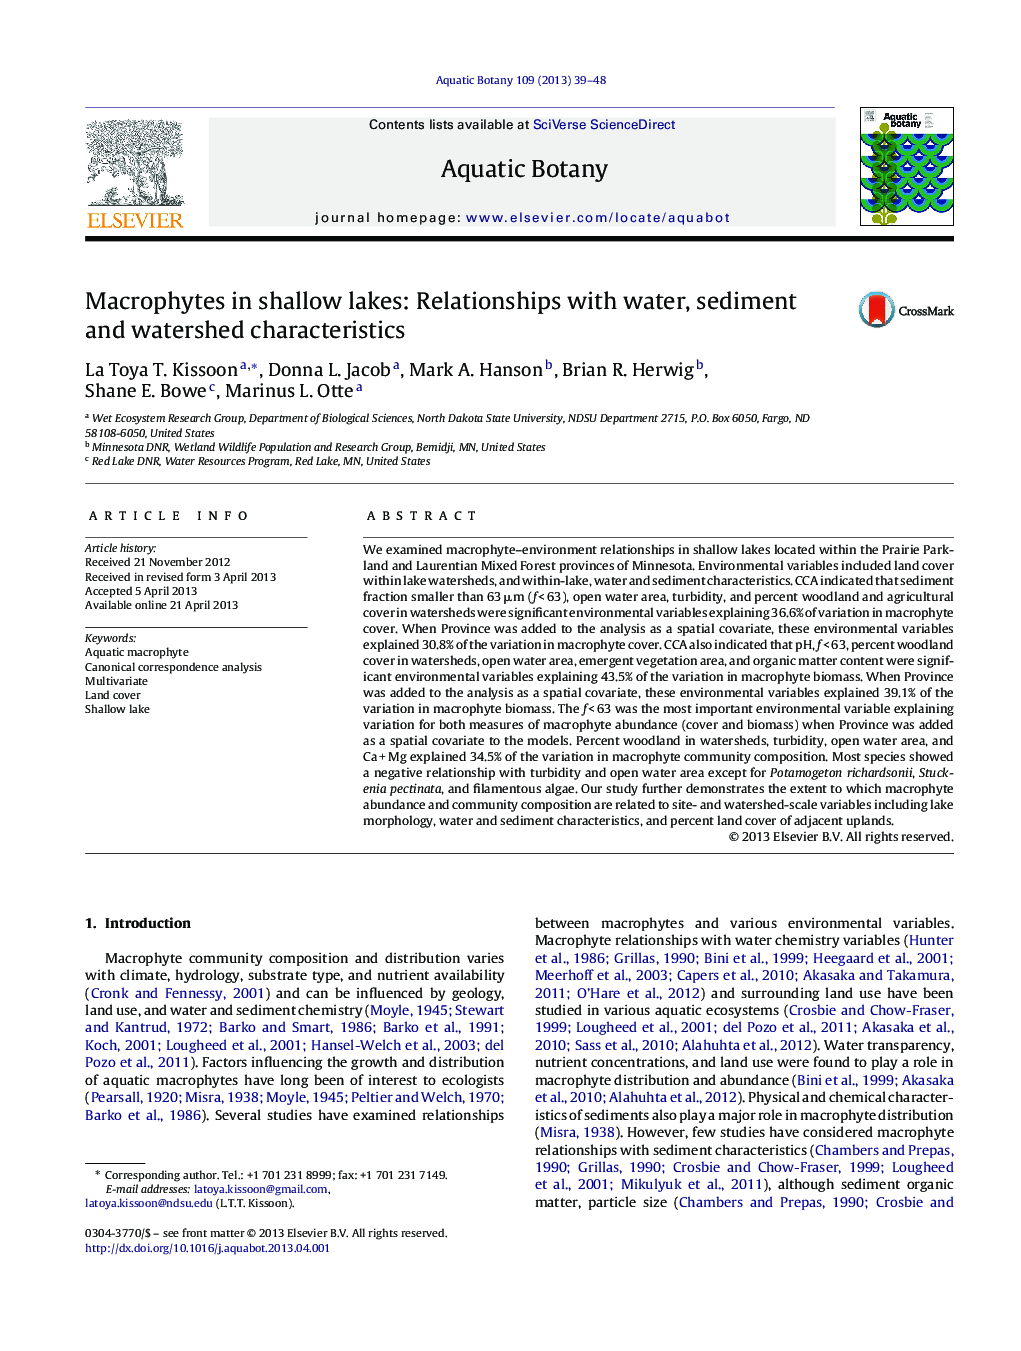 Macrophytes in shallow lakes: Relationships with water, sediment and watershed characteristics